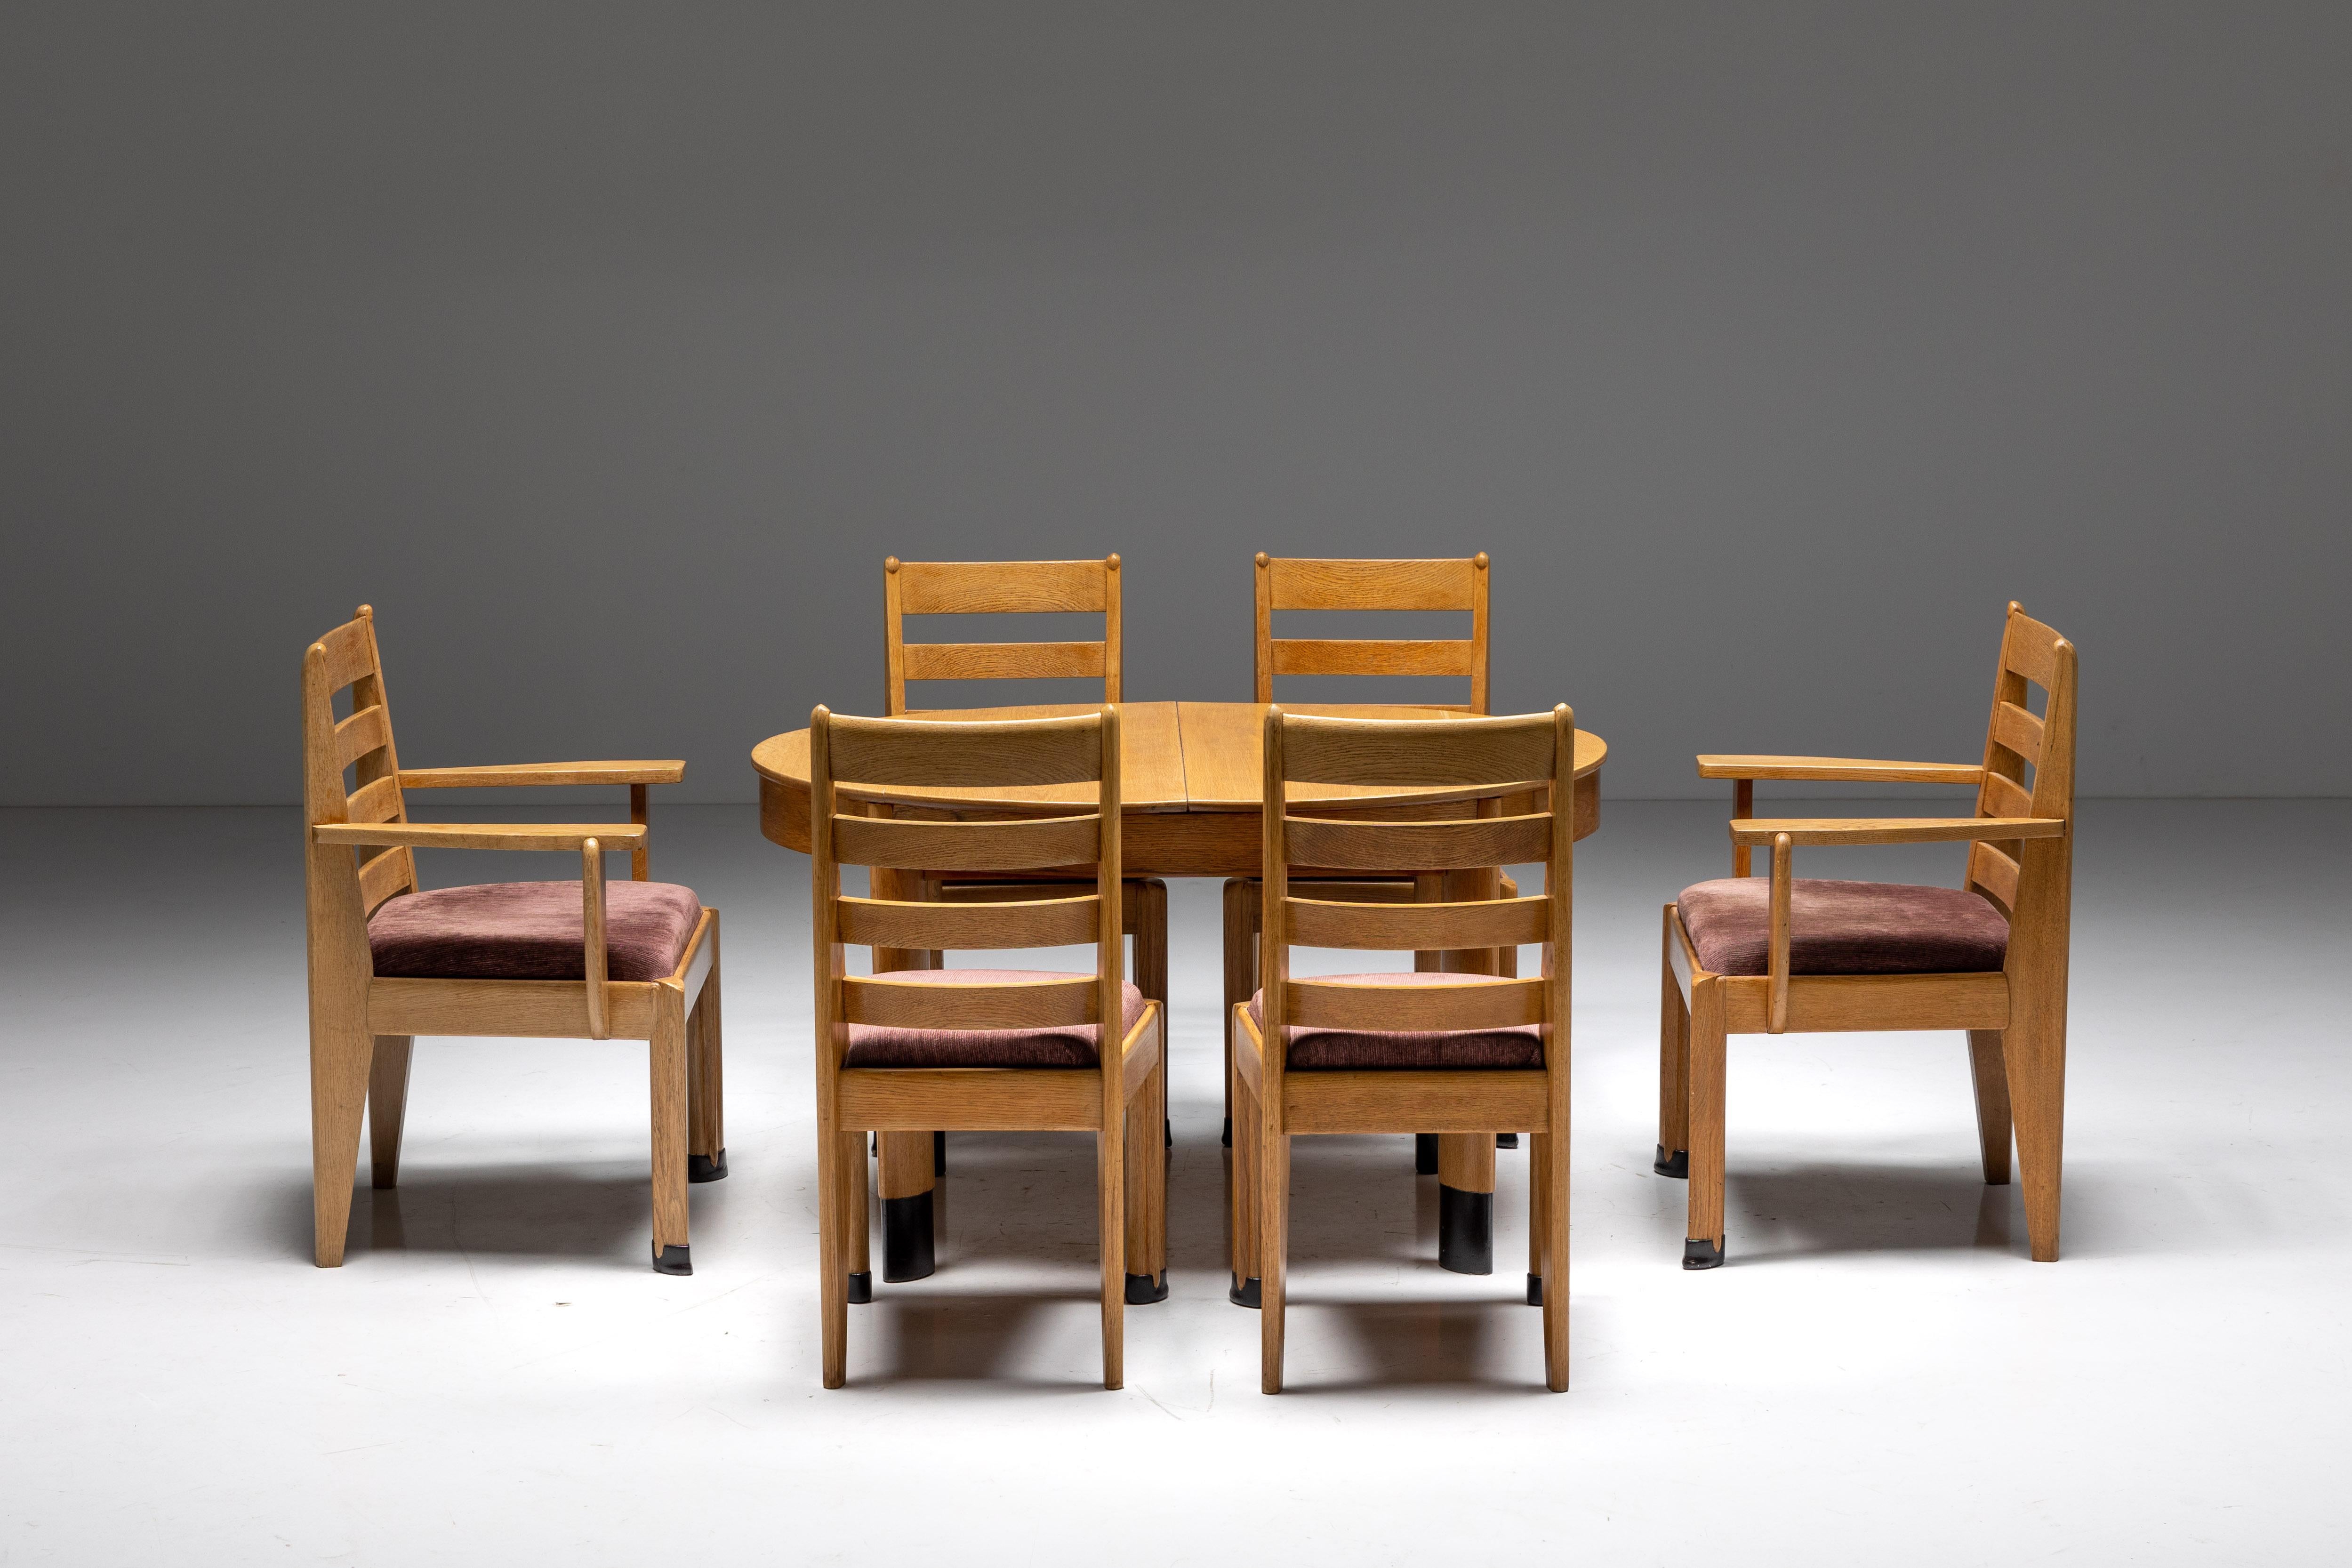 Rationalist Dining Chairs in Oak, Holland, 1920s For Sale 3